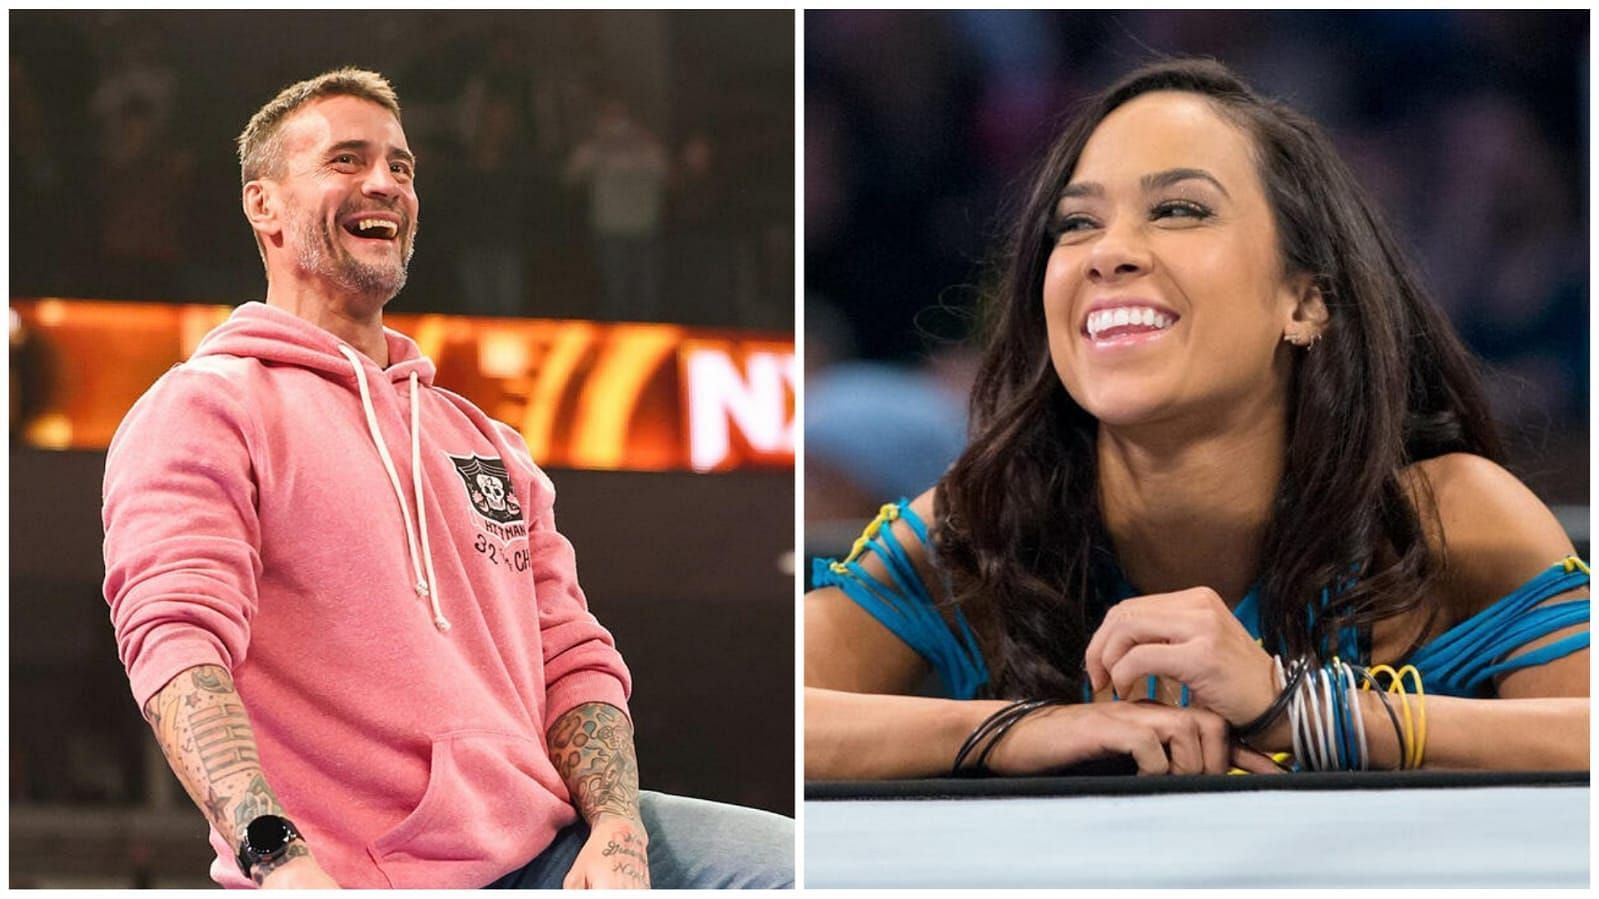 CM Punk wished AJ Lee on her birthday with a heartfelt message